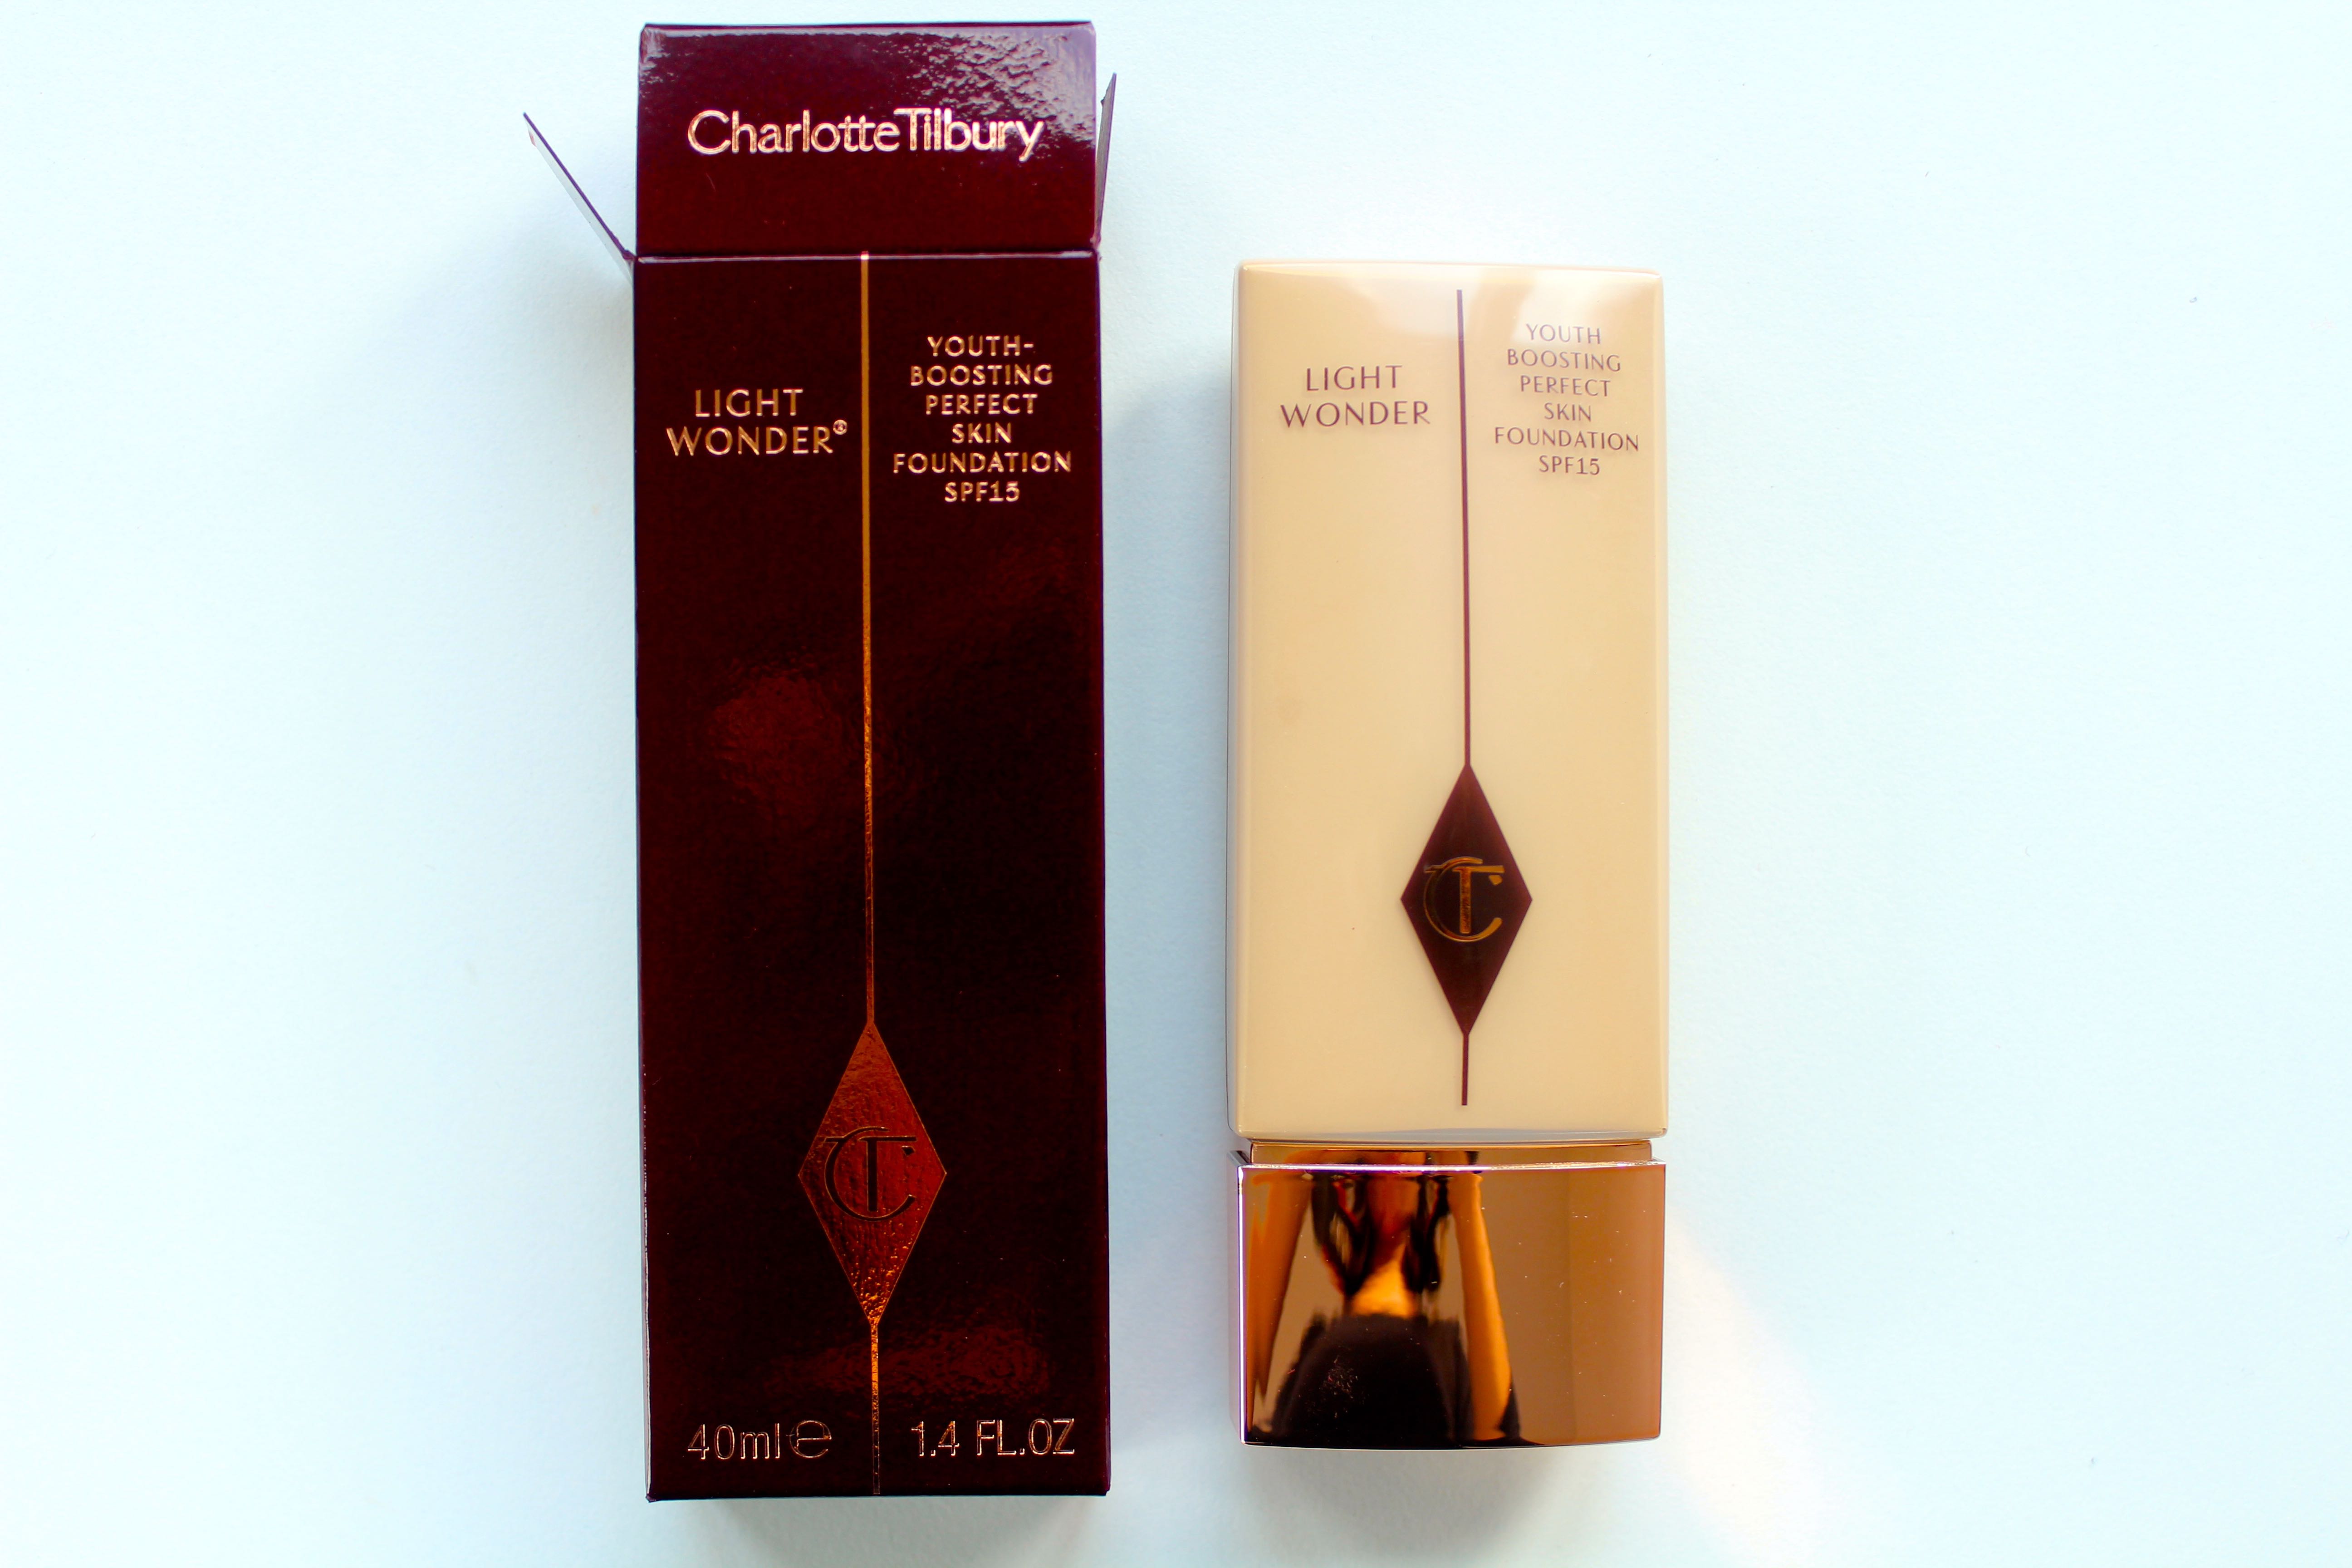 Charlotte-Tilbury-Haul-and-product-review-all-in-one-Light-Wonder-Foundation-in-shade-medium-6-and-box-packaging-by-face-made-up-facemadeup